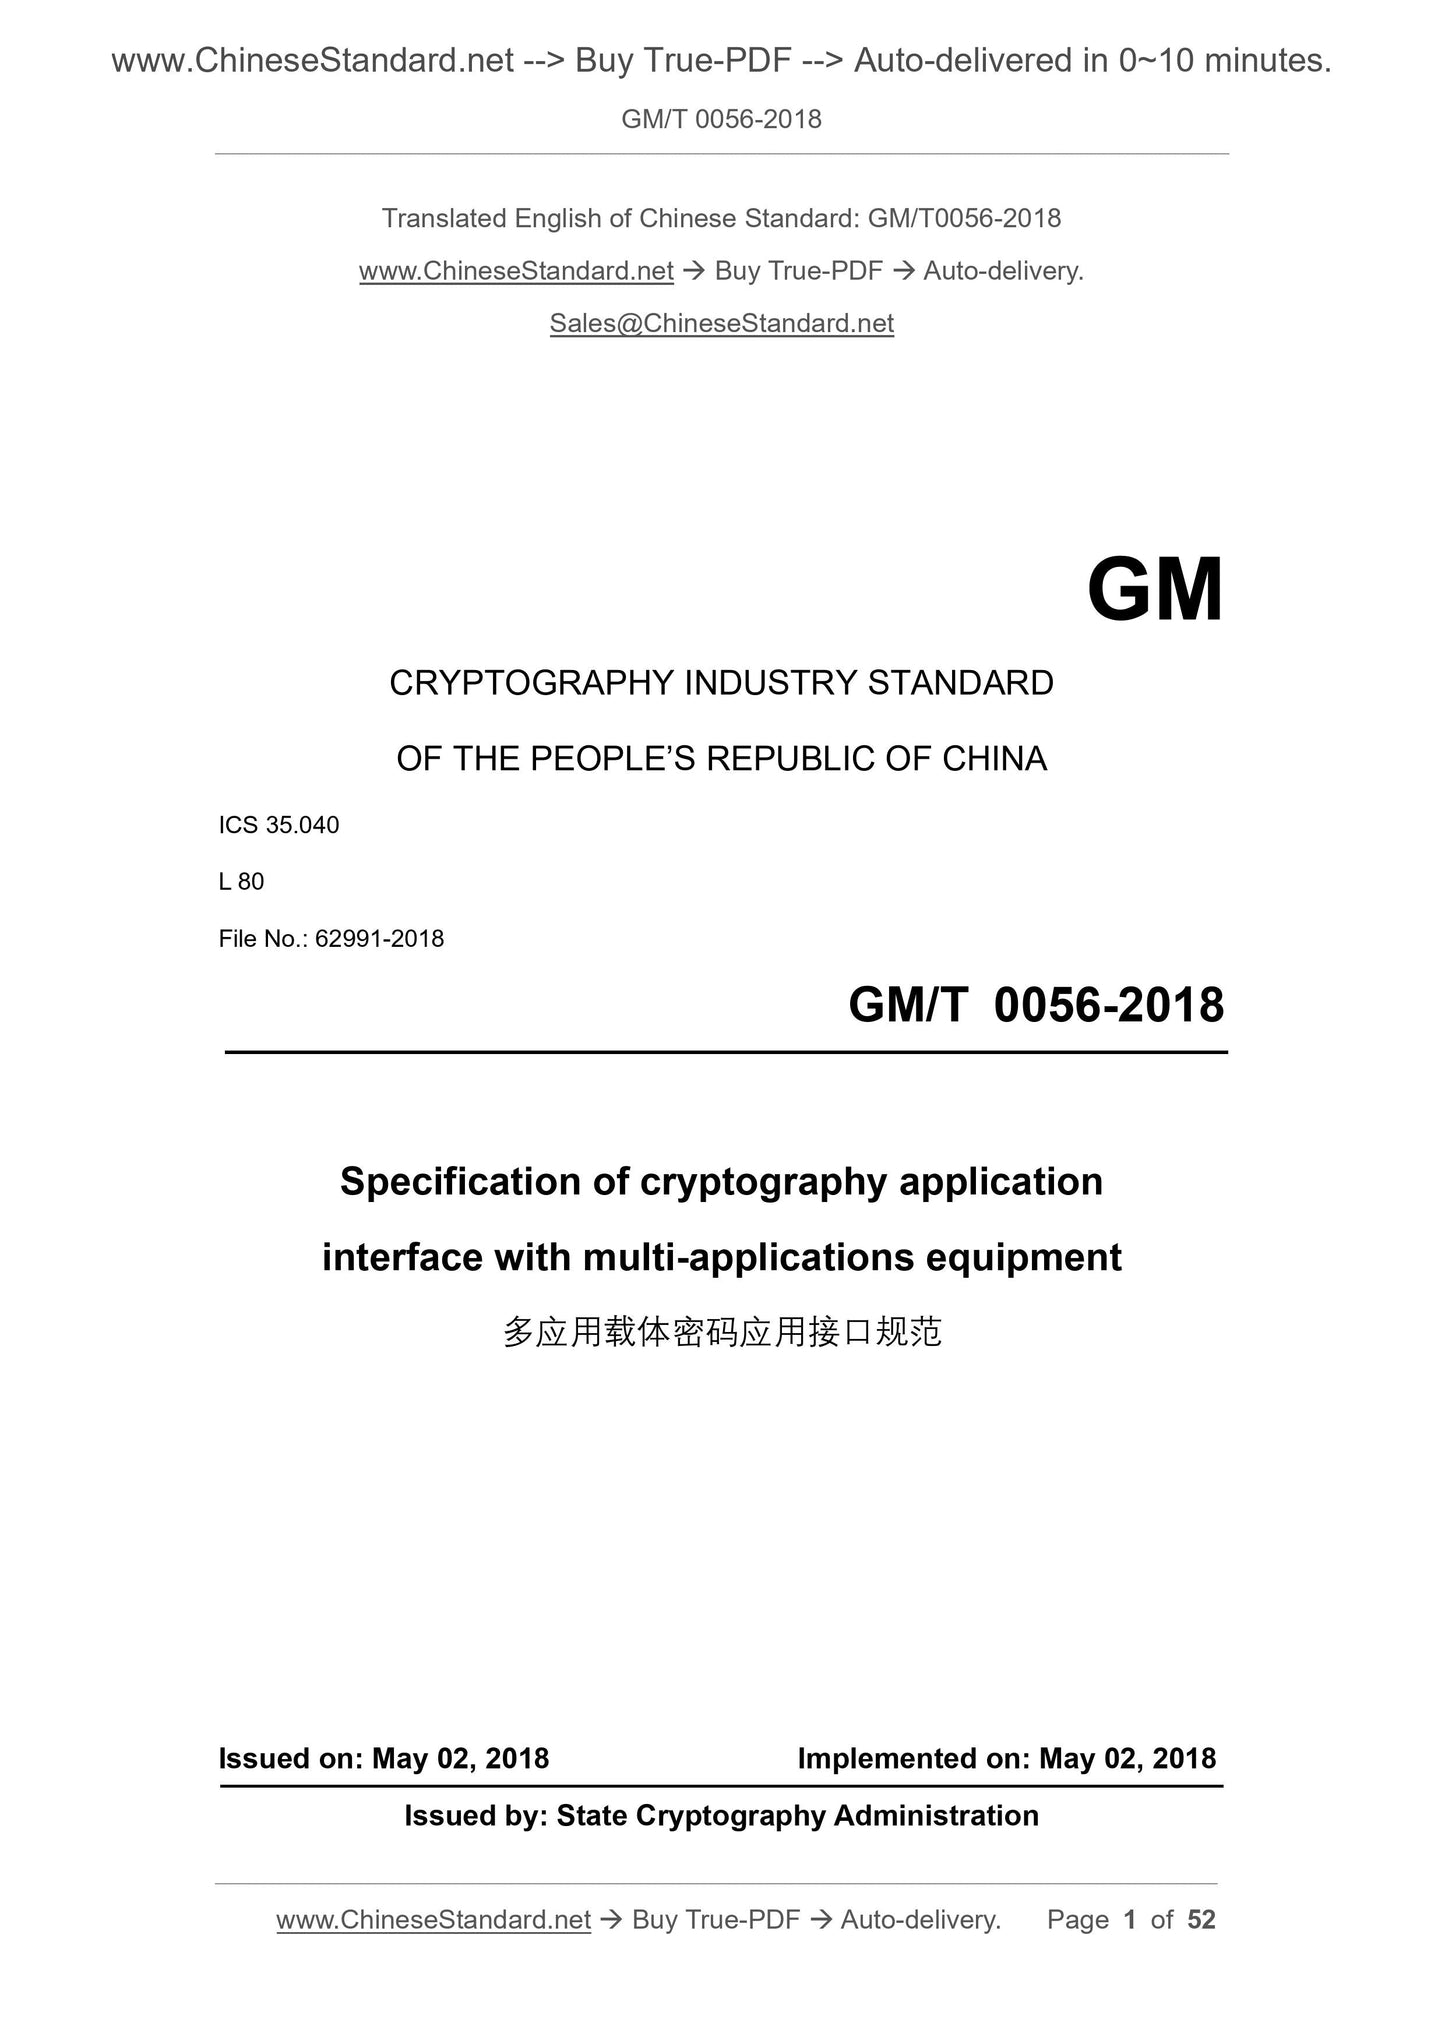 GM/T 0056-2018 Page 1